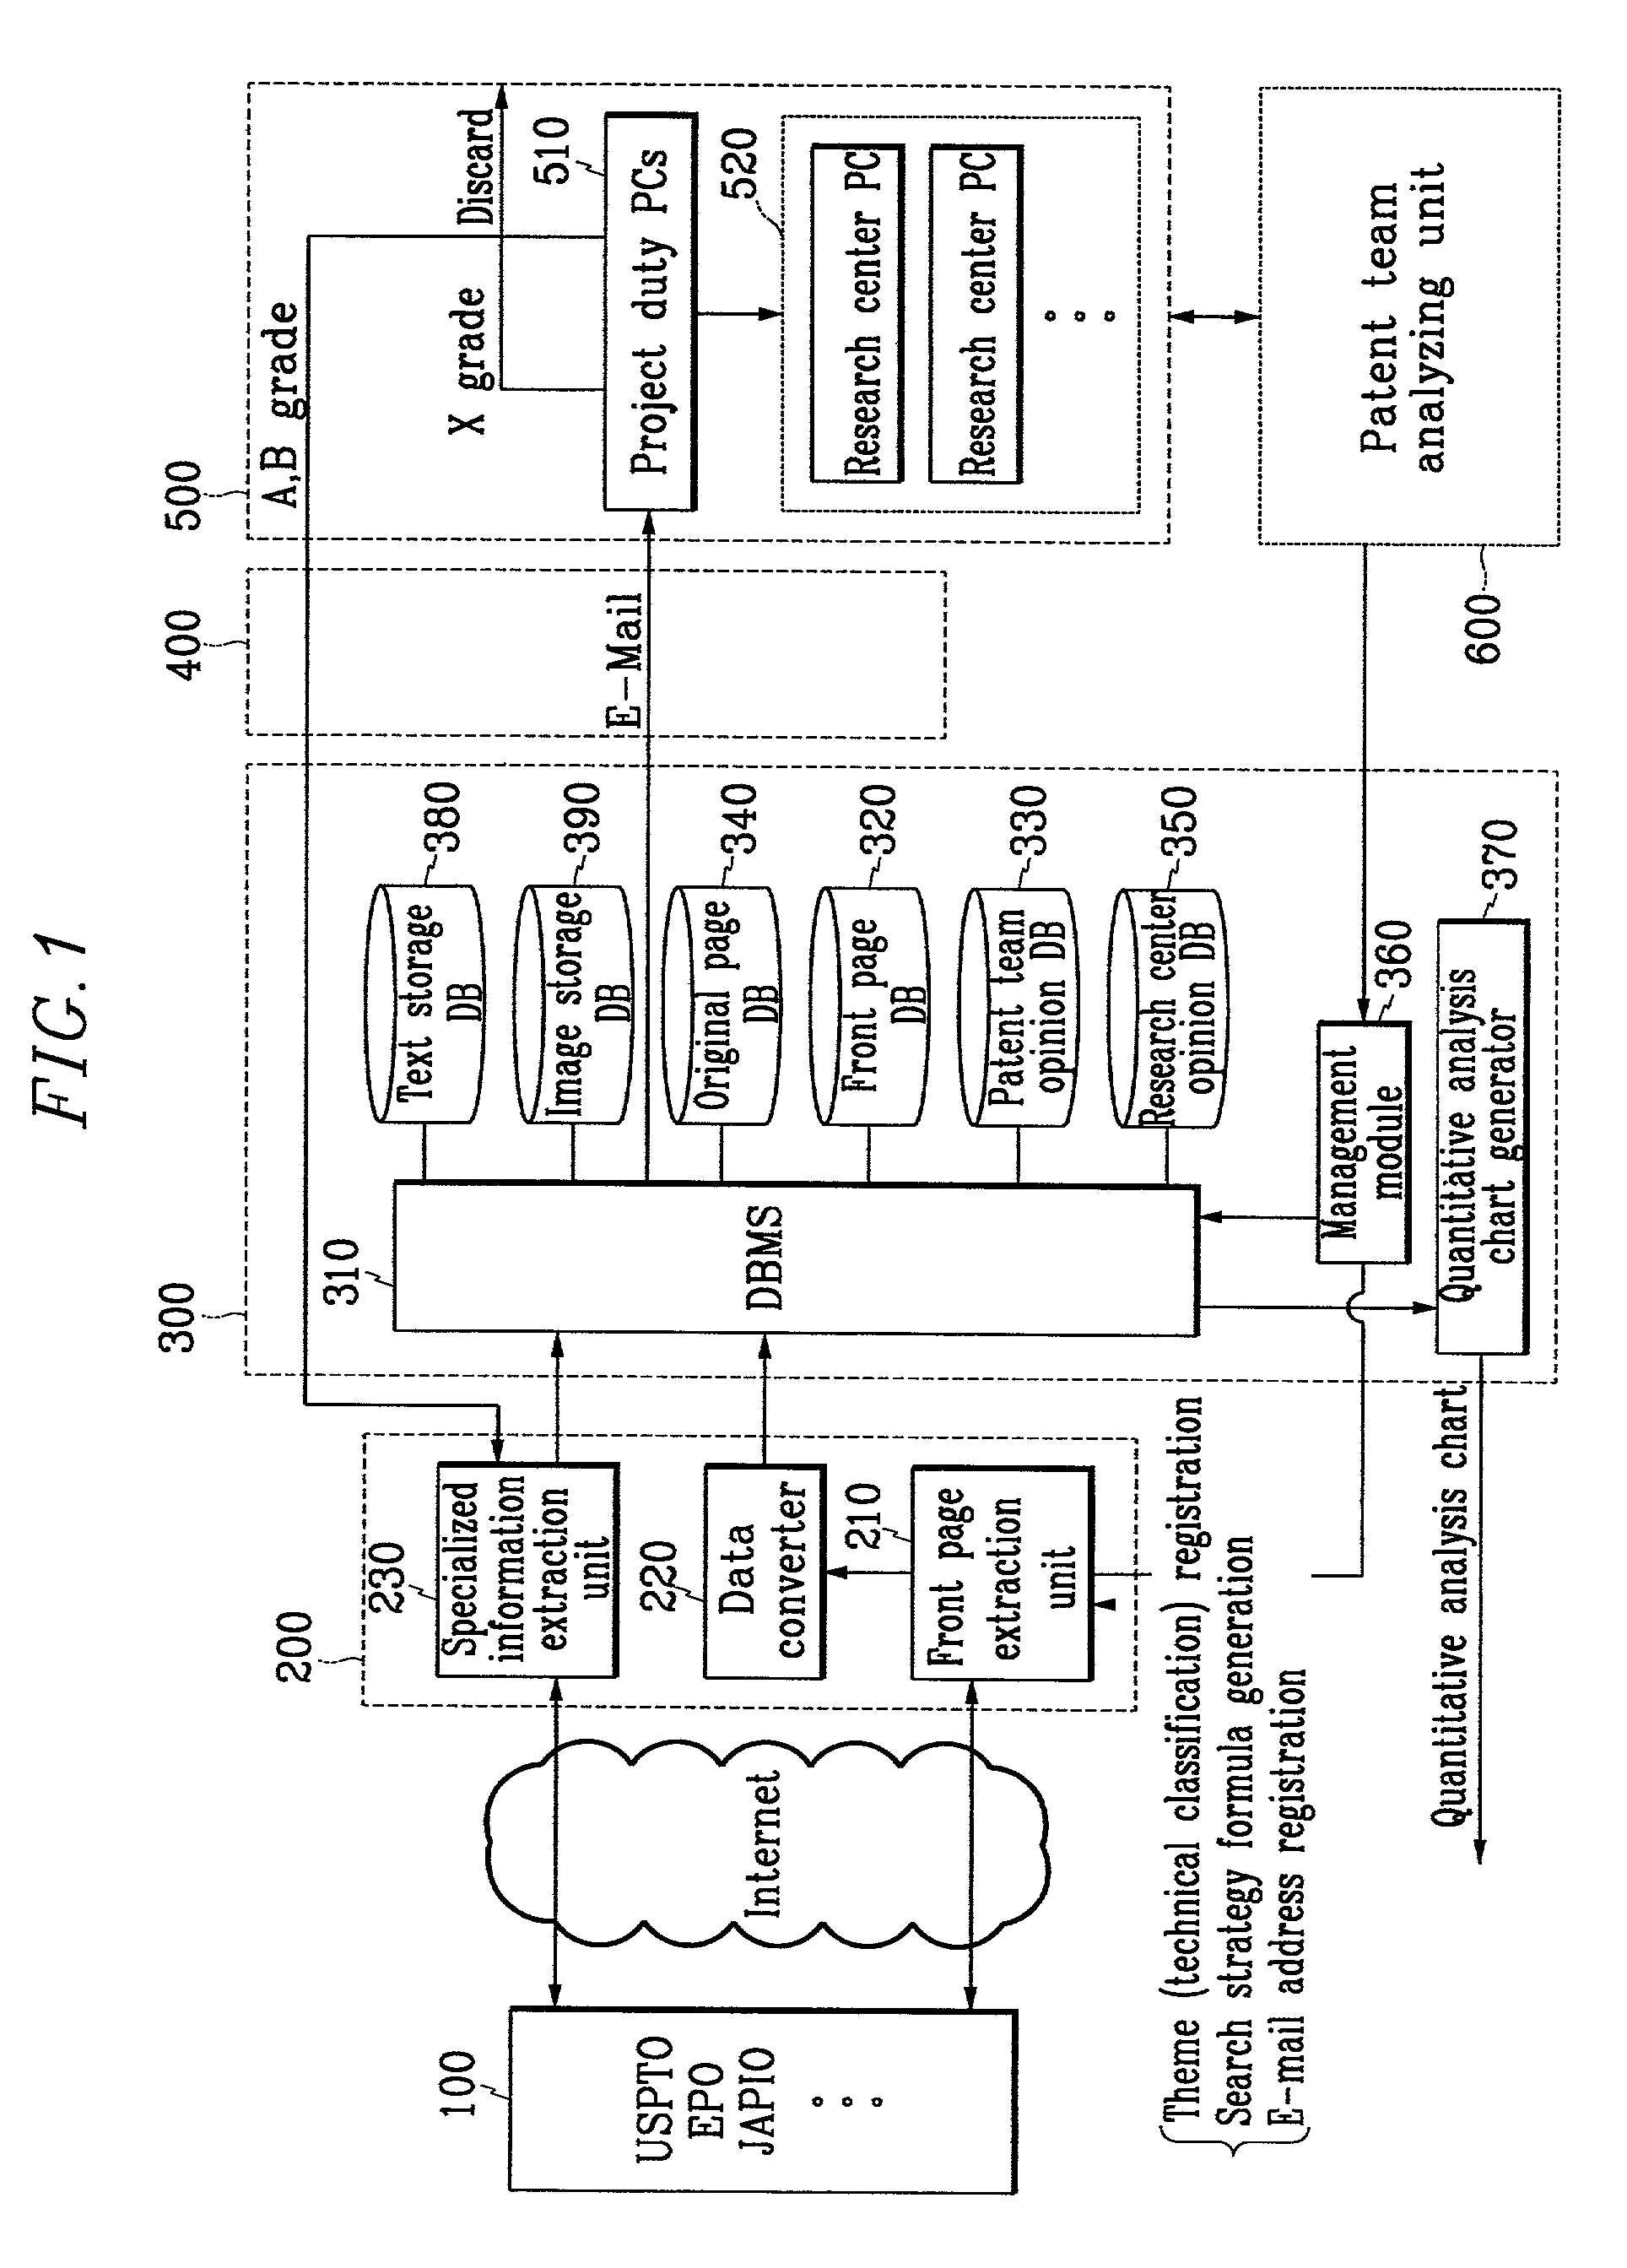 System and method for analyzing and utilizing intellectual property information